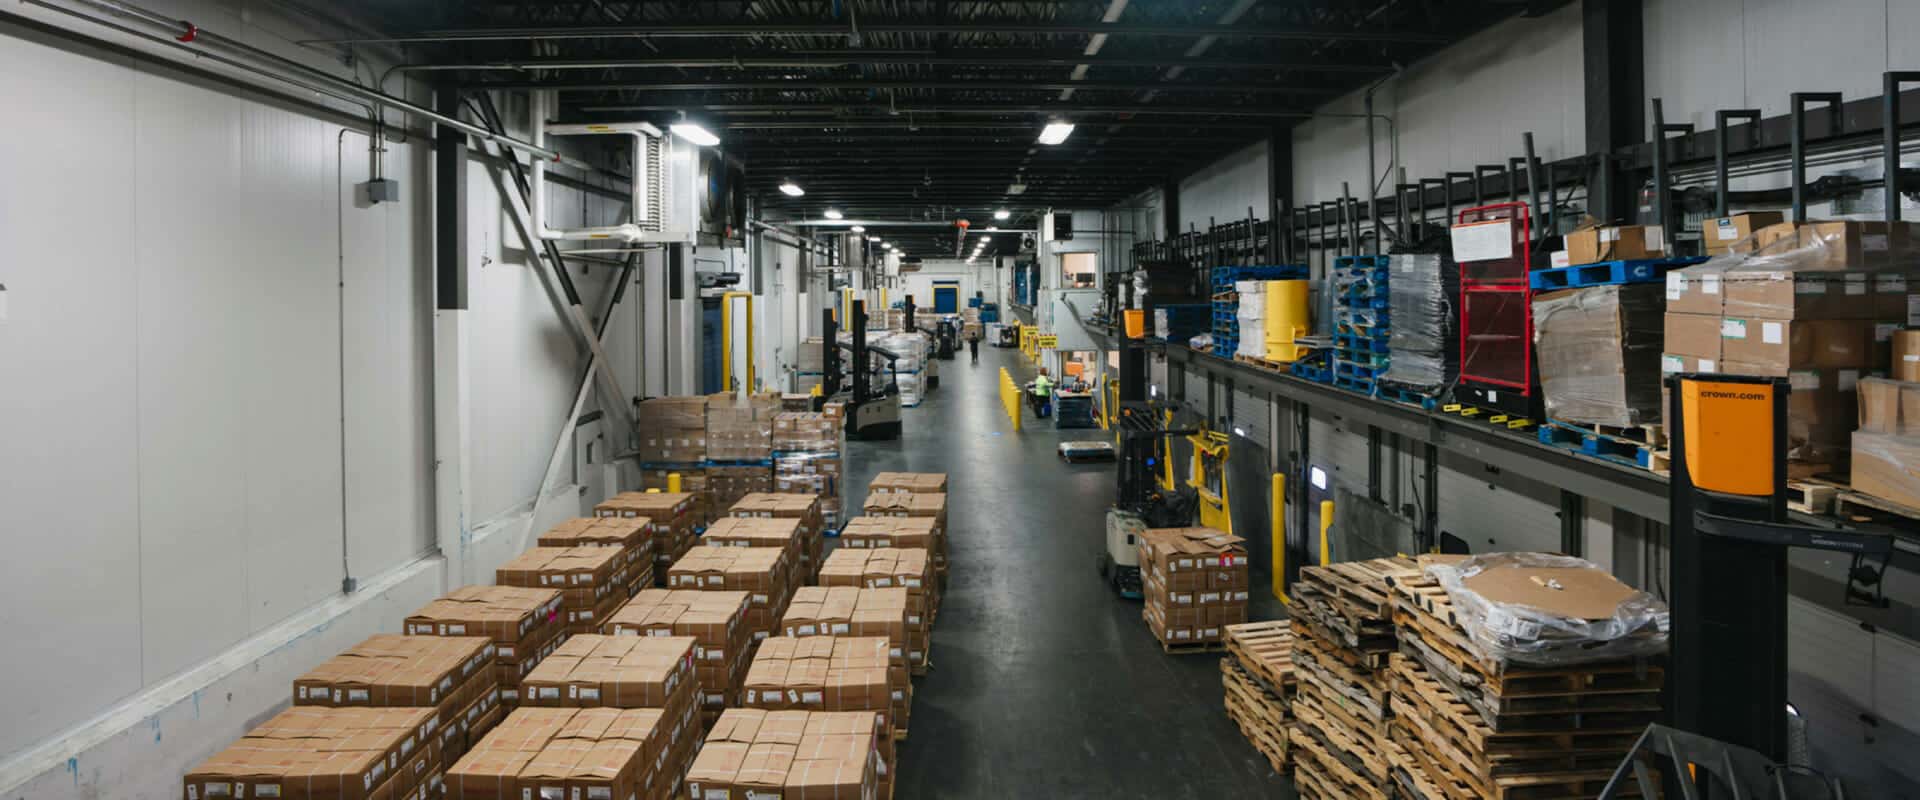 A large warehouse with boxes, and empty palettes